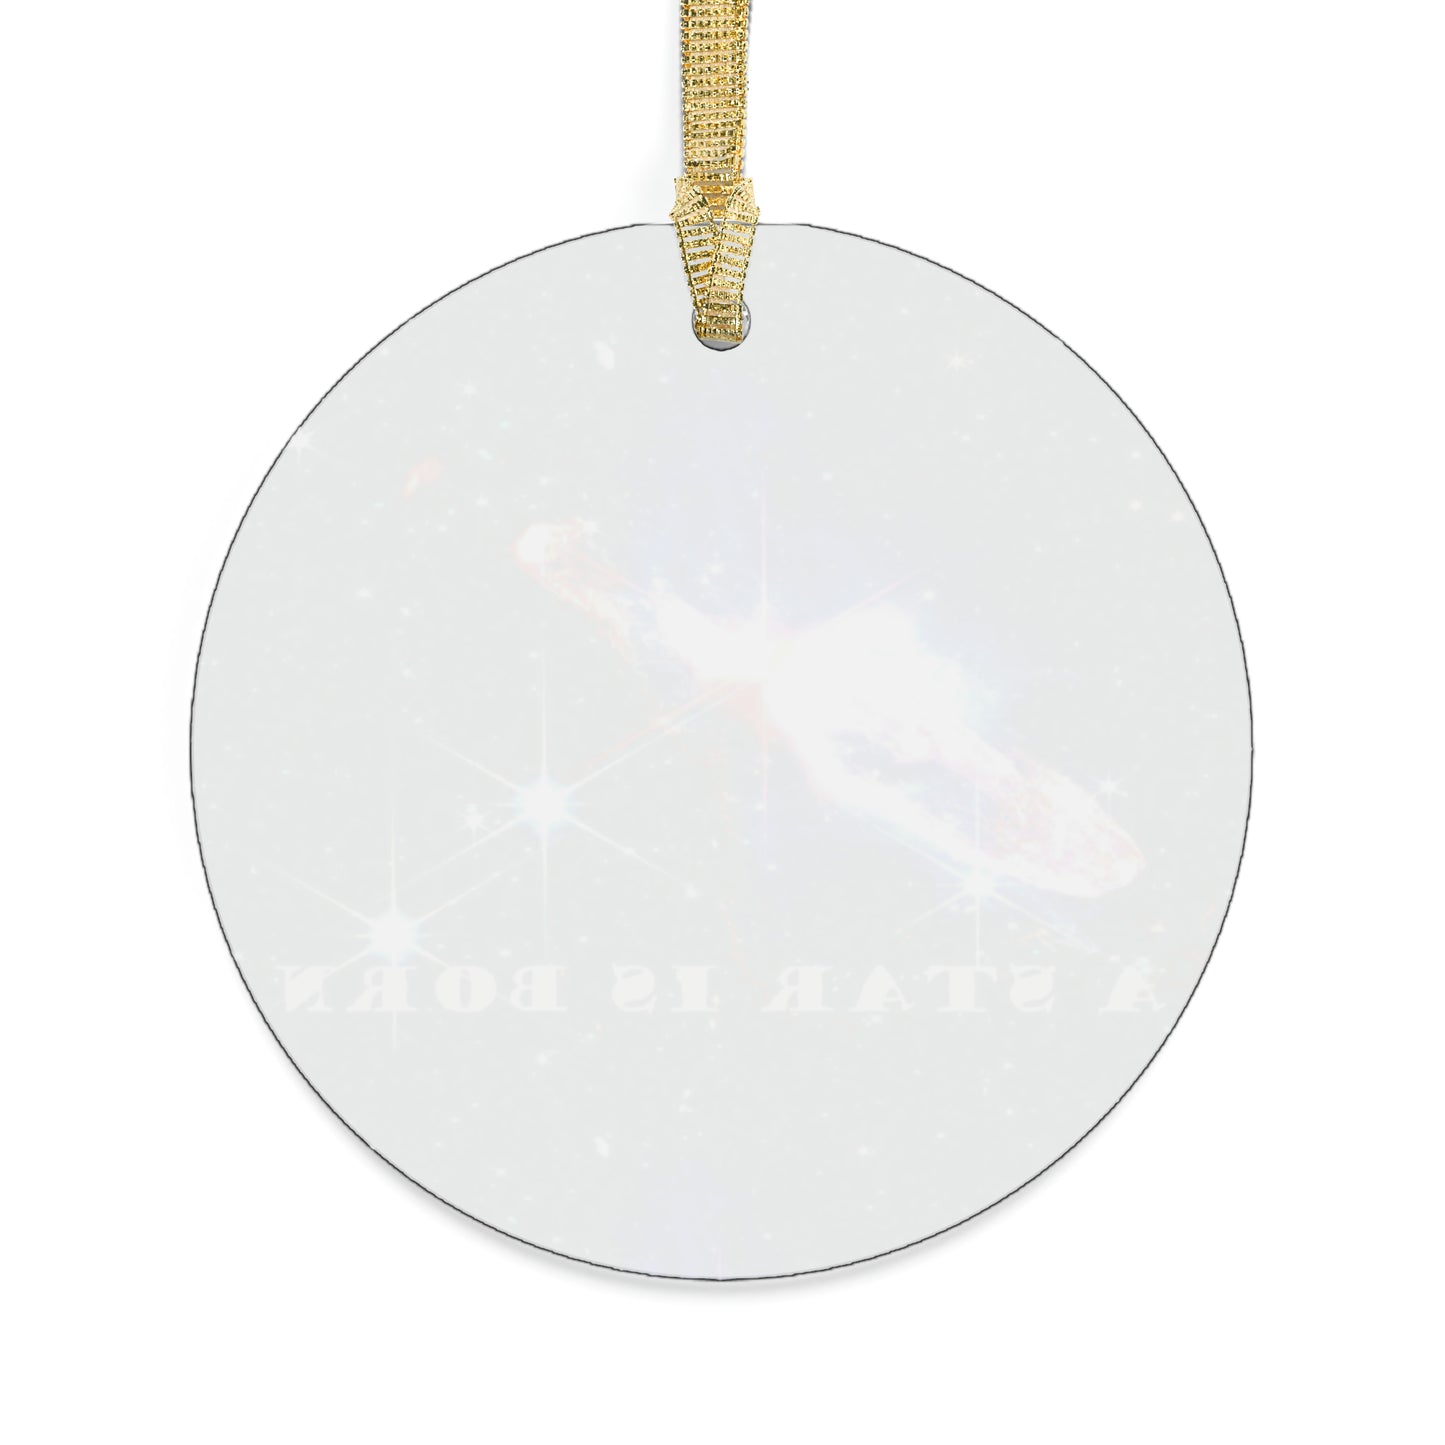 ✨ Deck Your Halls with Starlight: Cosmos Series Acrylic Ornaments ✨